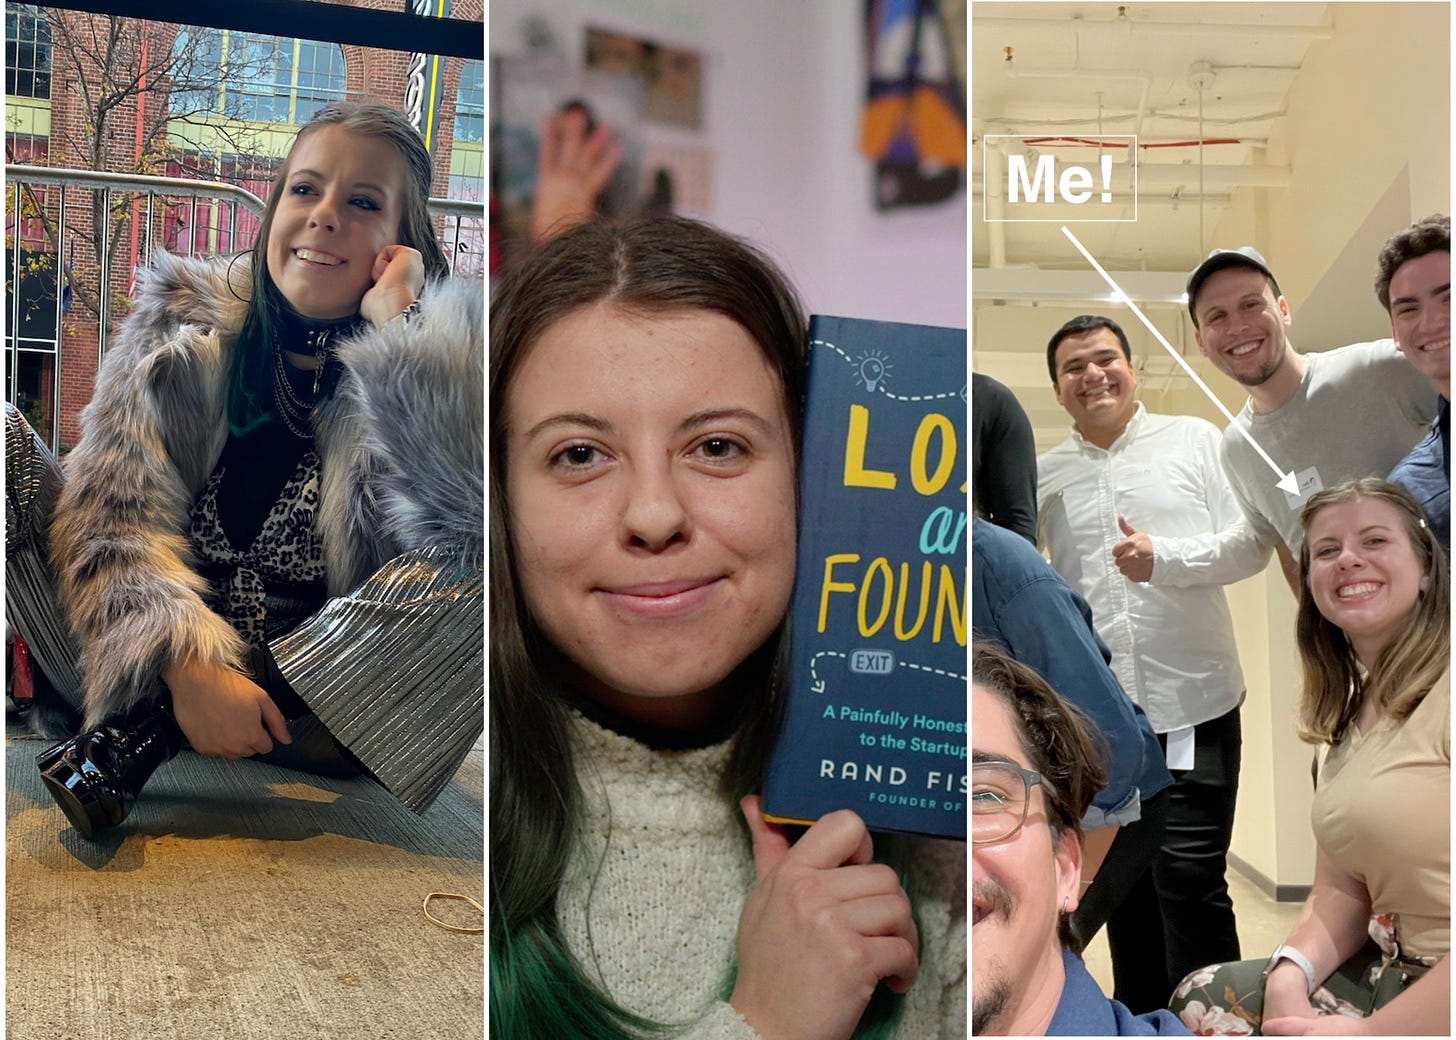 A collage of three photos: a white woman (me) wearing a fluffy jacket, shiny pants, and black shiny boots while smiling and sitting on the ground. Me smiling in my old office holding Rand Fishkin's book "Lost and Founder", and me smiling in Notion's office near some members of their team.